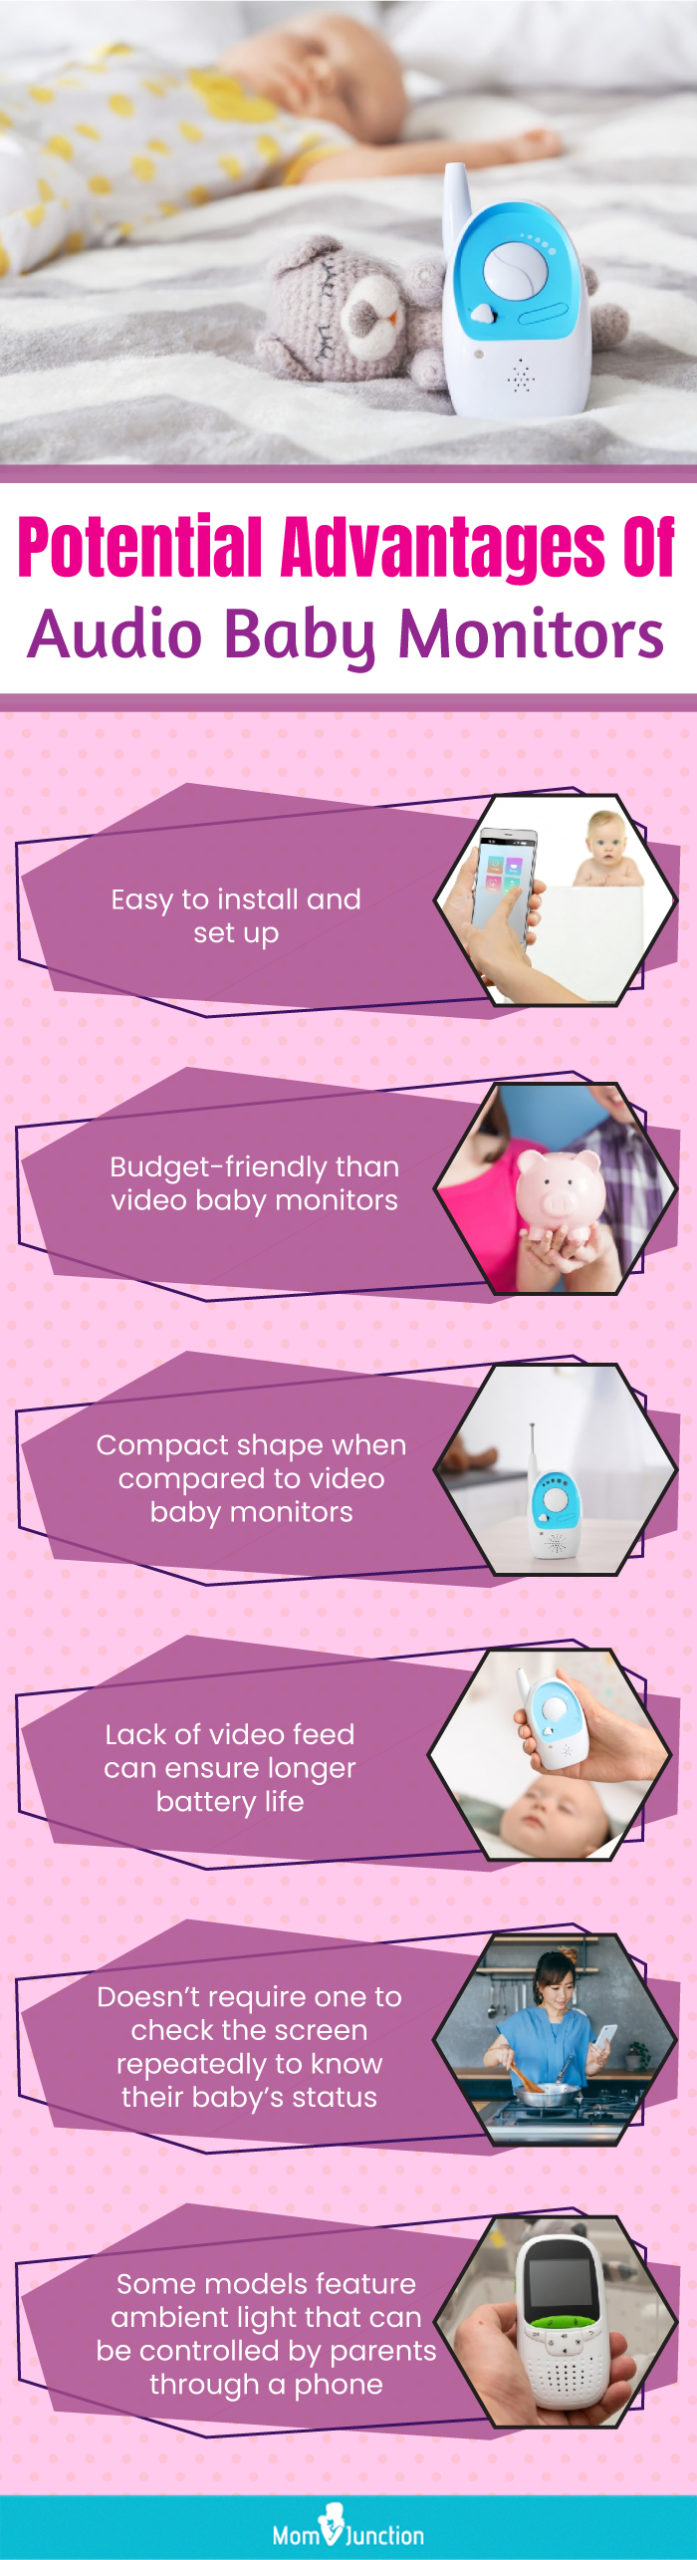 Potential Advantages Of Audio Baby Monitors For Babies (infographic)